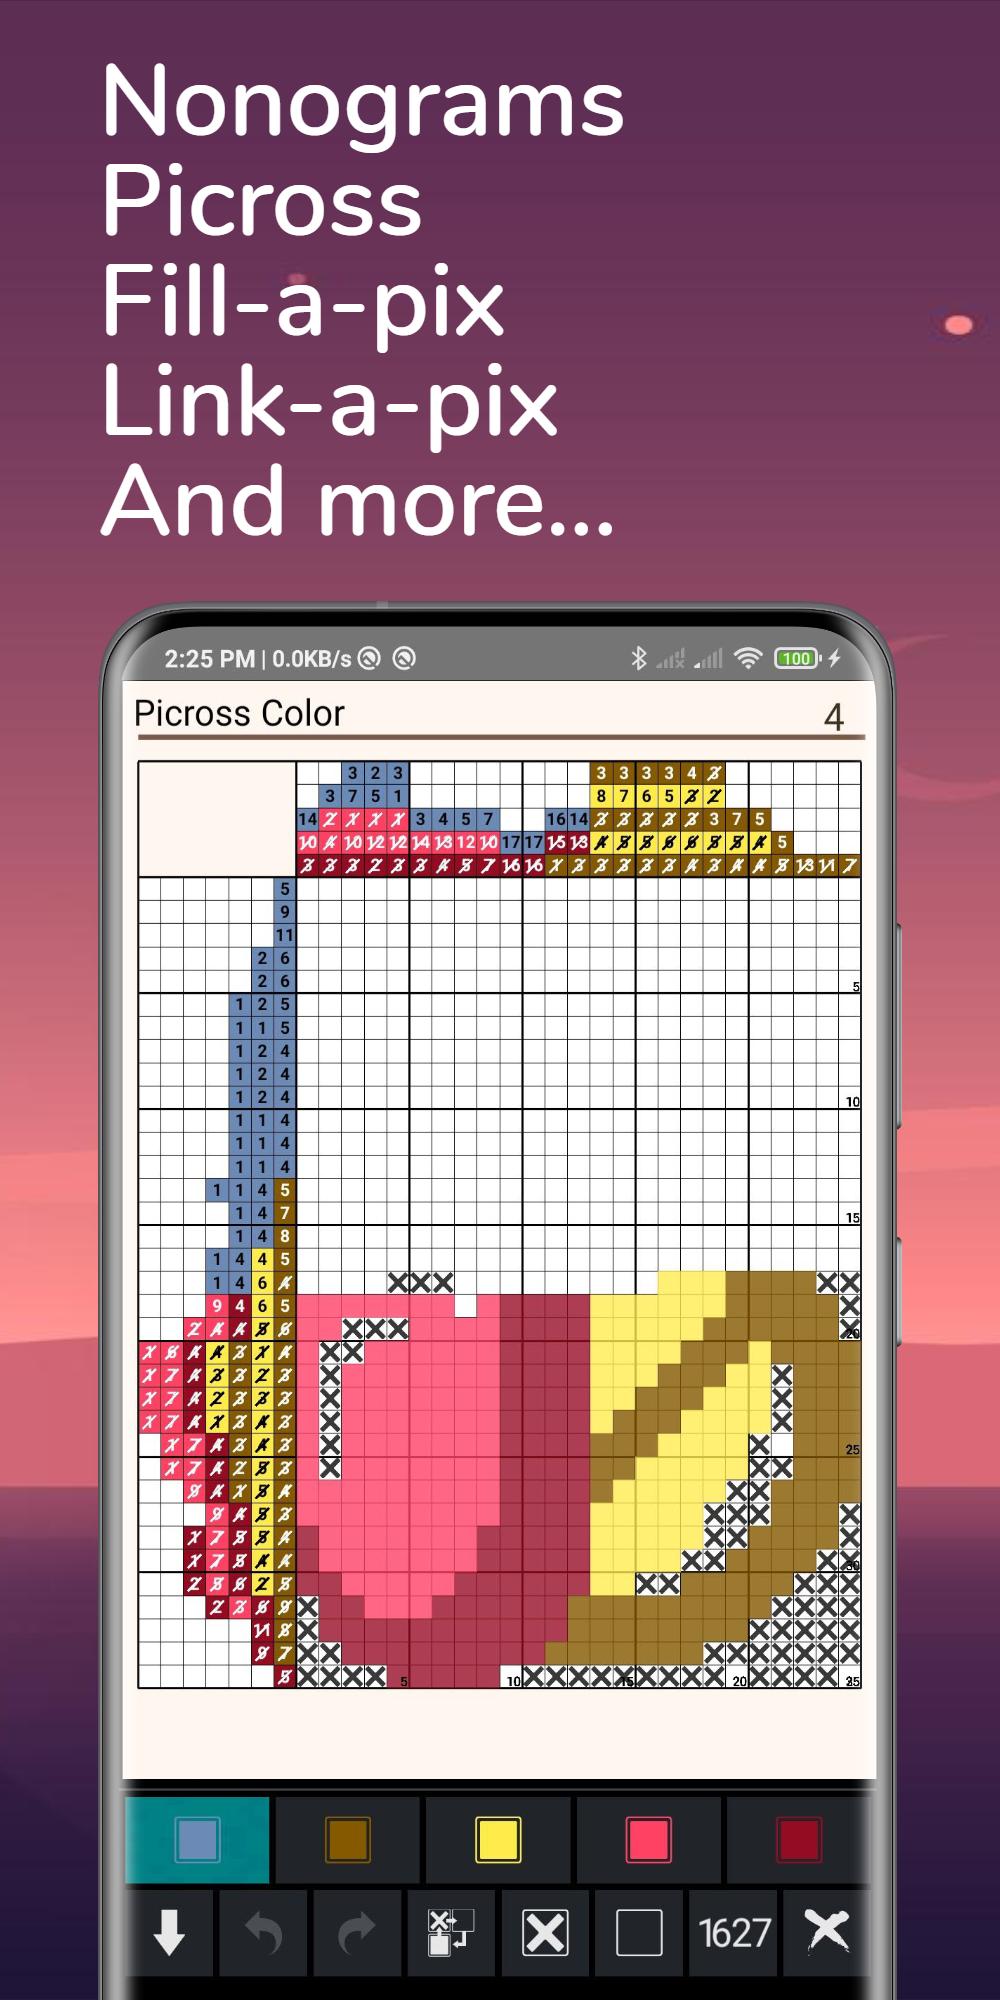 Daily Logic Puzzles & Number Games 1.9.4 Screenshot 14